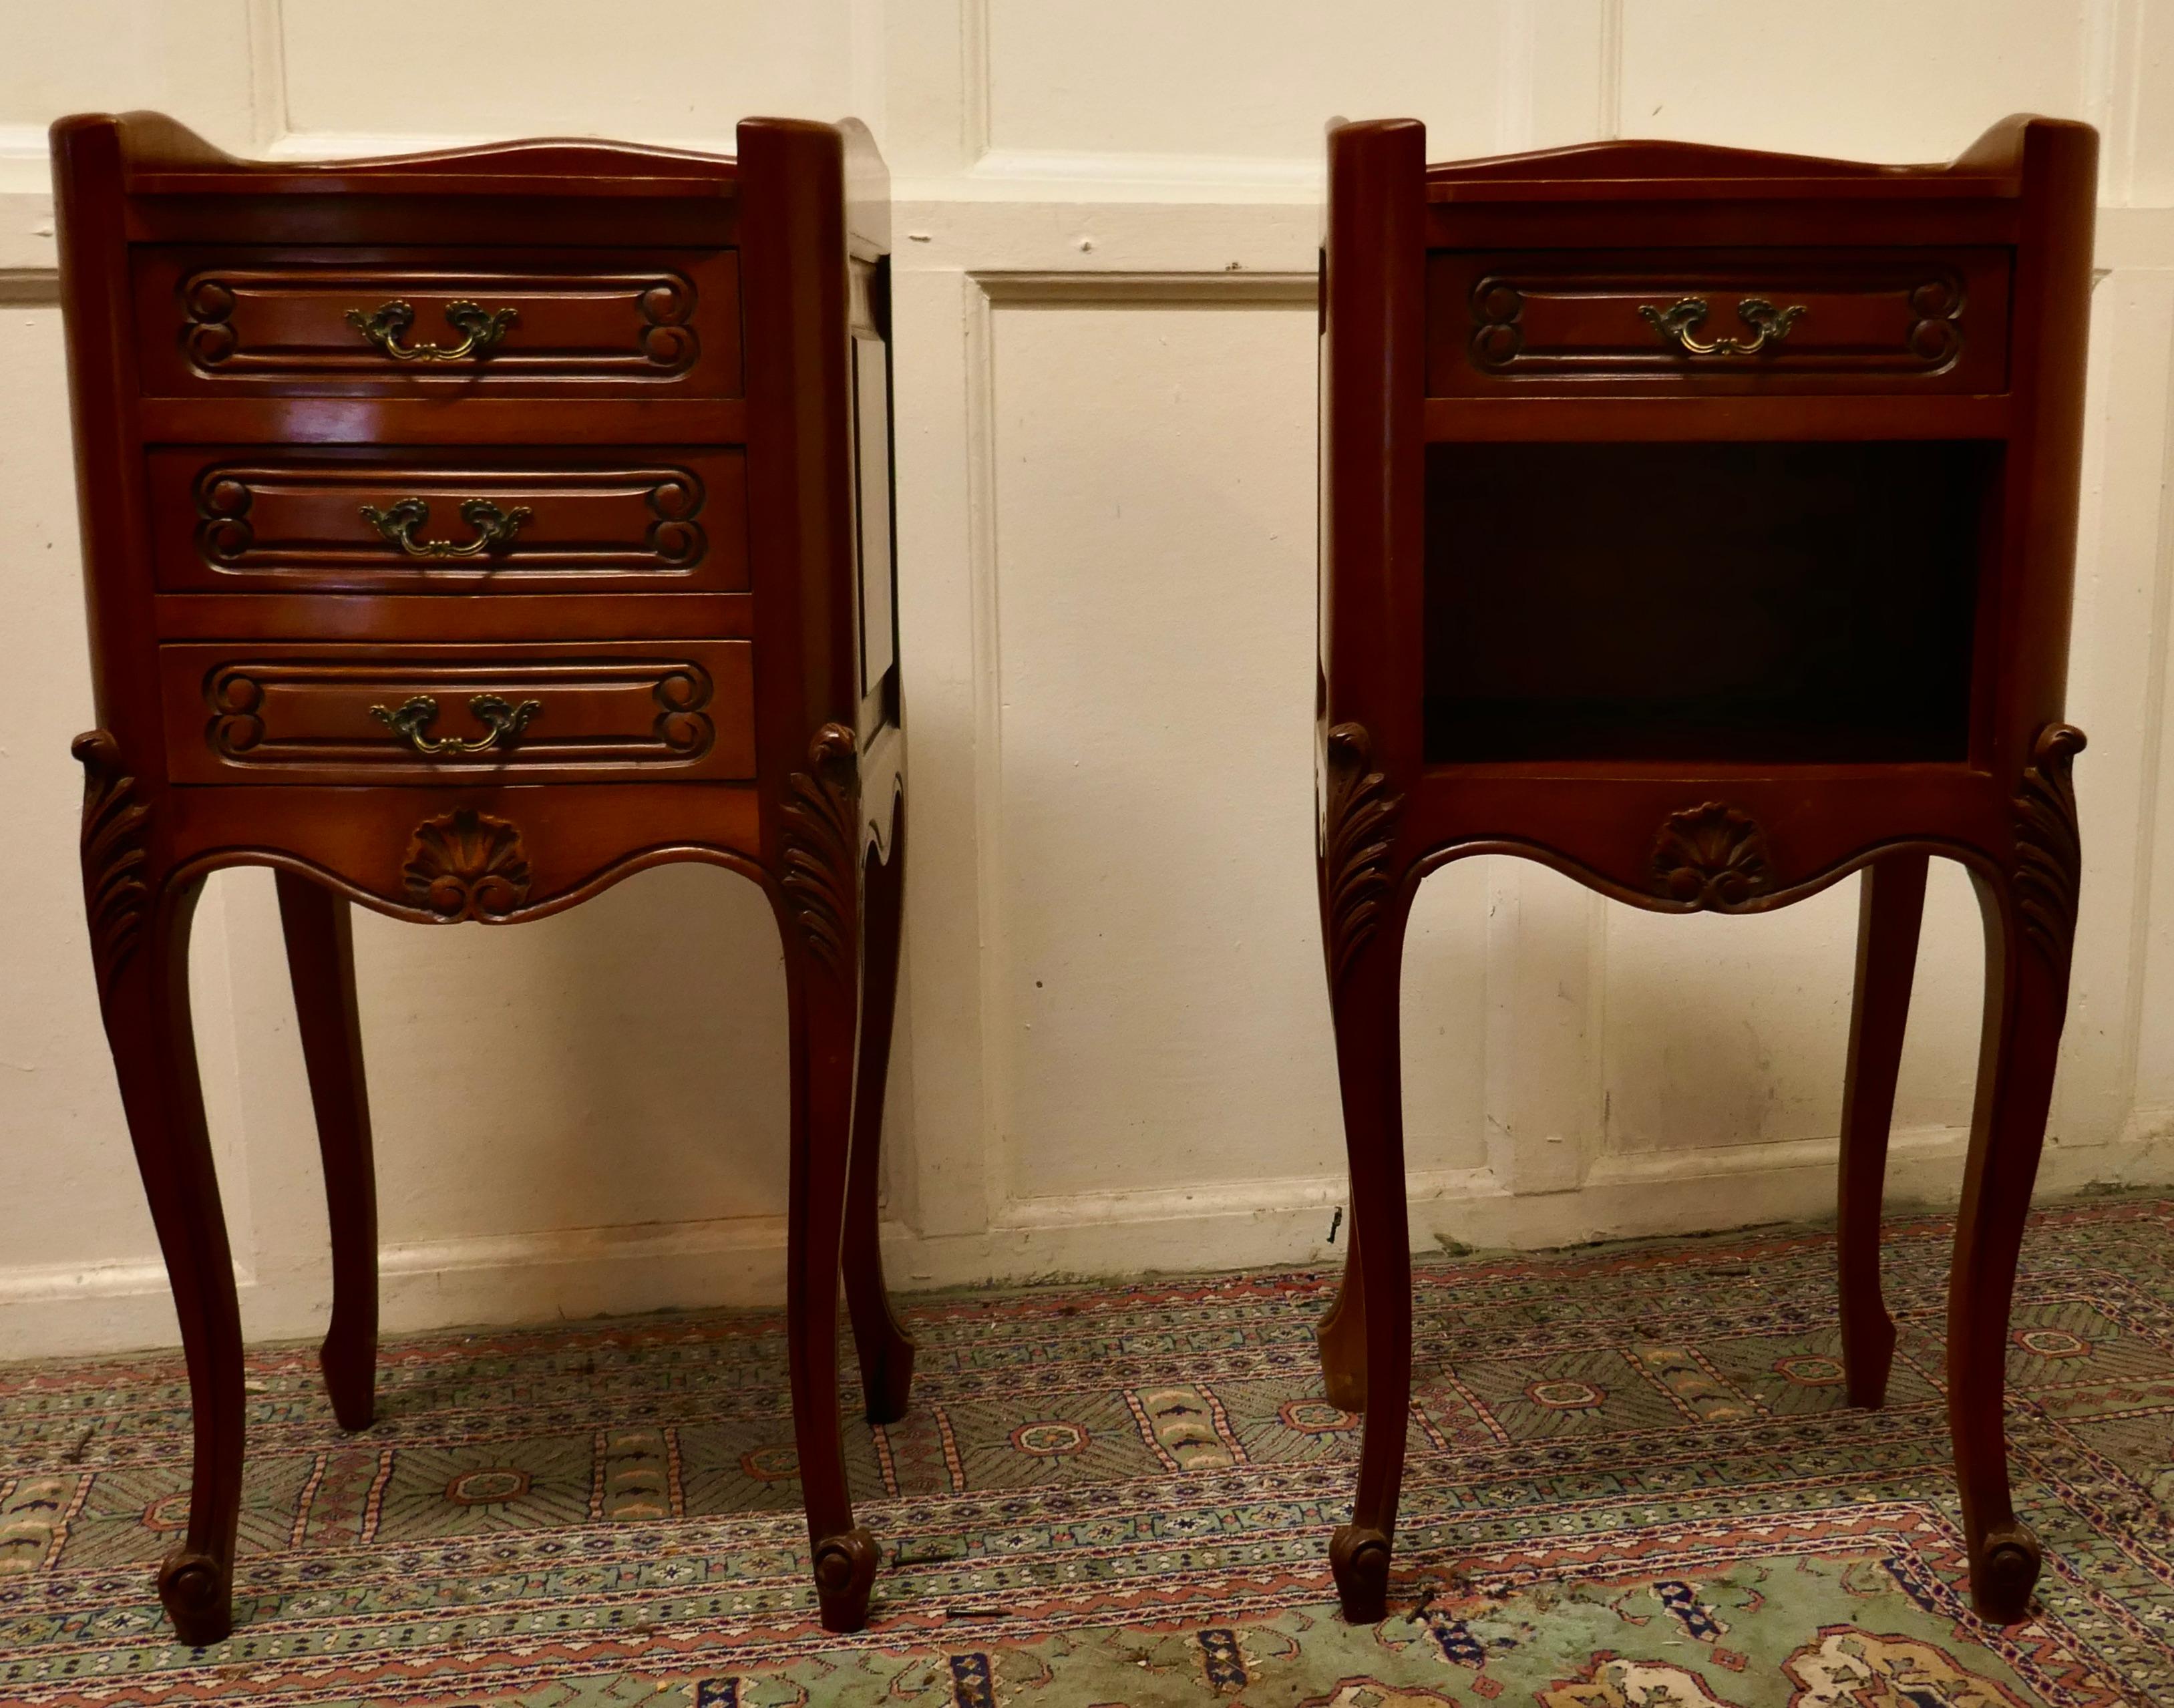 Pair of French cherry wood bedside cabinets or cupboards

This is a pretty pair of cabinets or chevets, they have slightly bow front shape to their fronts and a scalloped gallery around the top, they stand on very elegant cabriole legs with carved